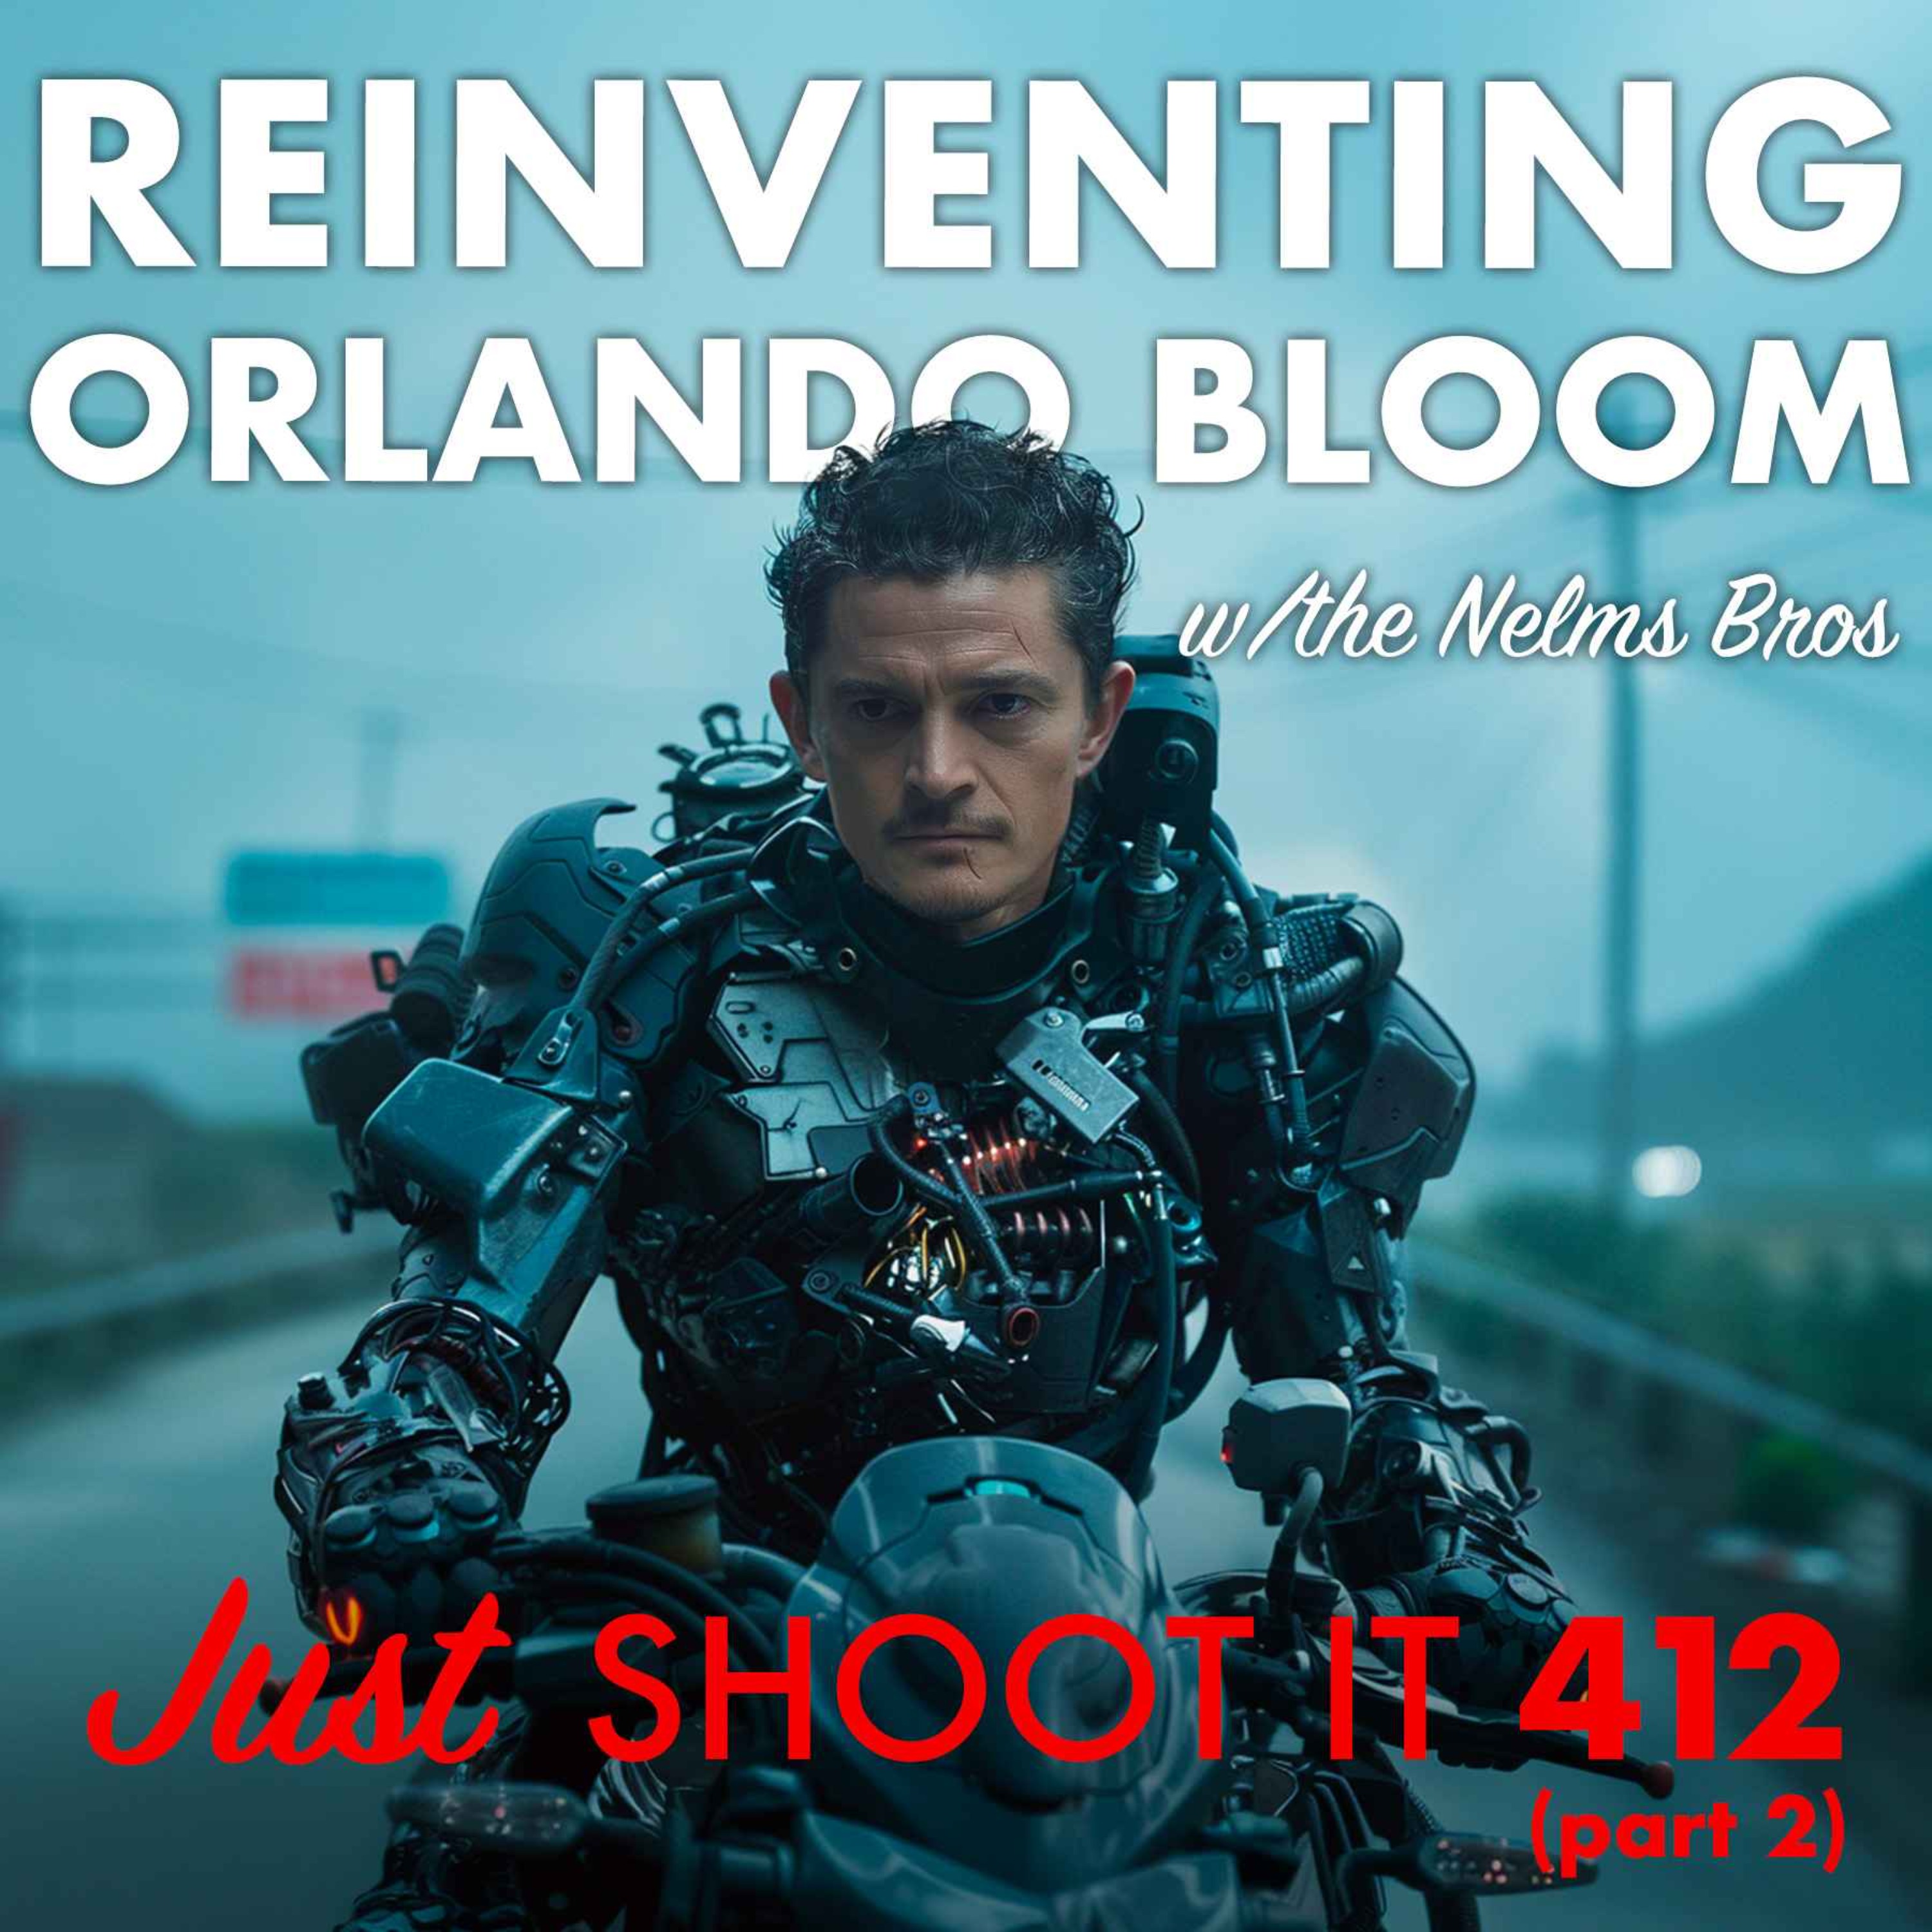 Reinventing Orlando Bloom w/ the Nelms Brothers - Just Shoot It 412 Pt. 2